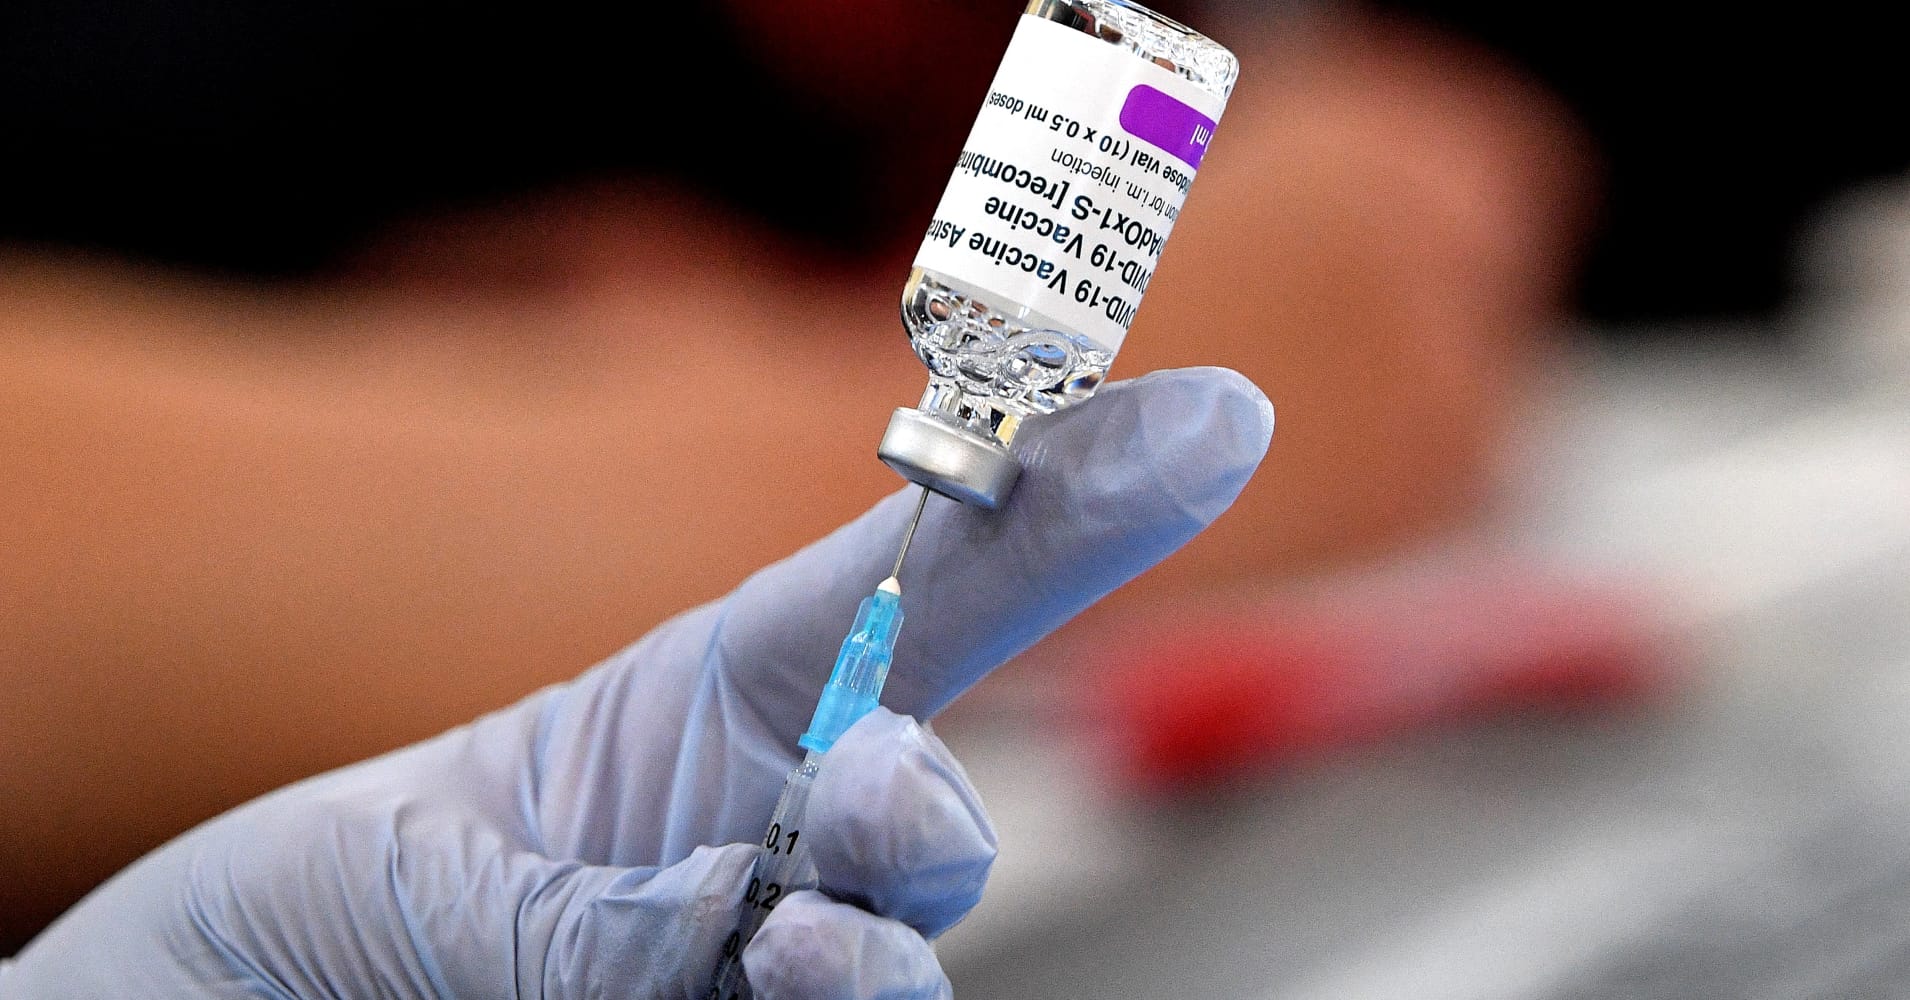 A paramedic prepares doses of AstraZeneca vaccine for patients at a walk-in COVID-19 clinic inside a Buddhist temple in the Smithfield suburb of Sydney on August 4, 2021.